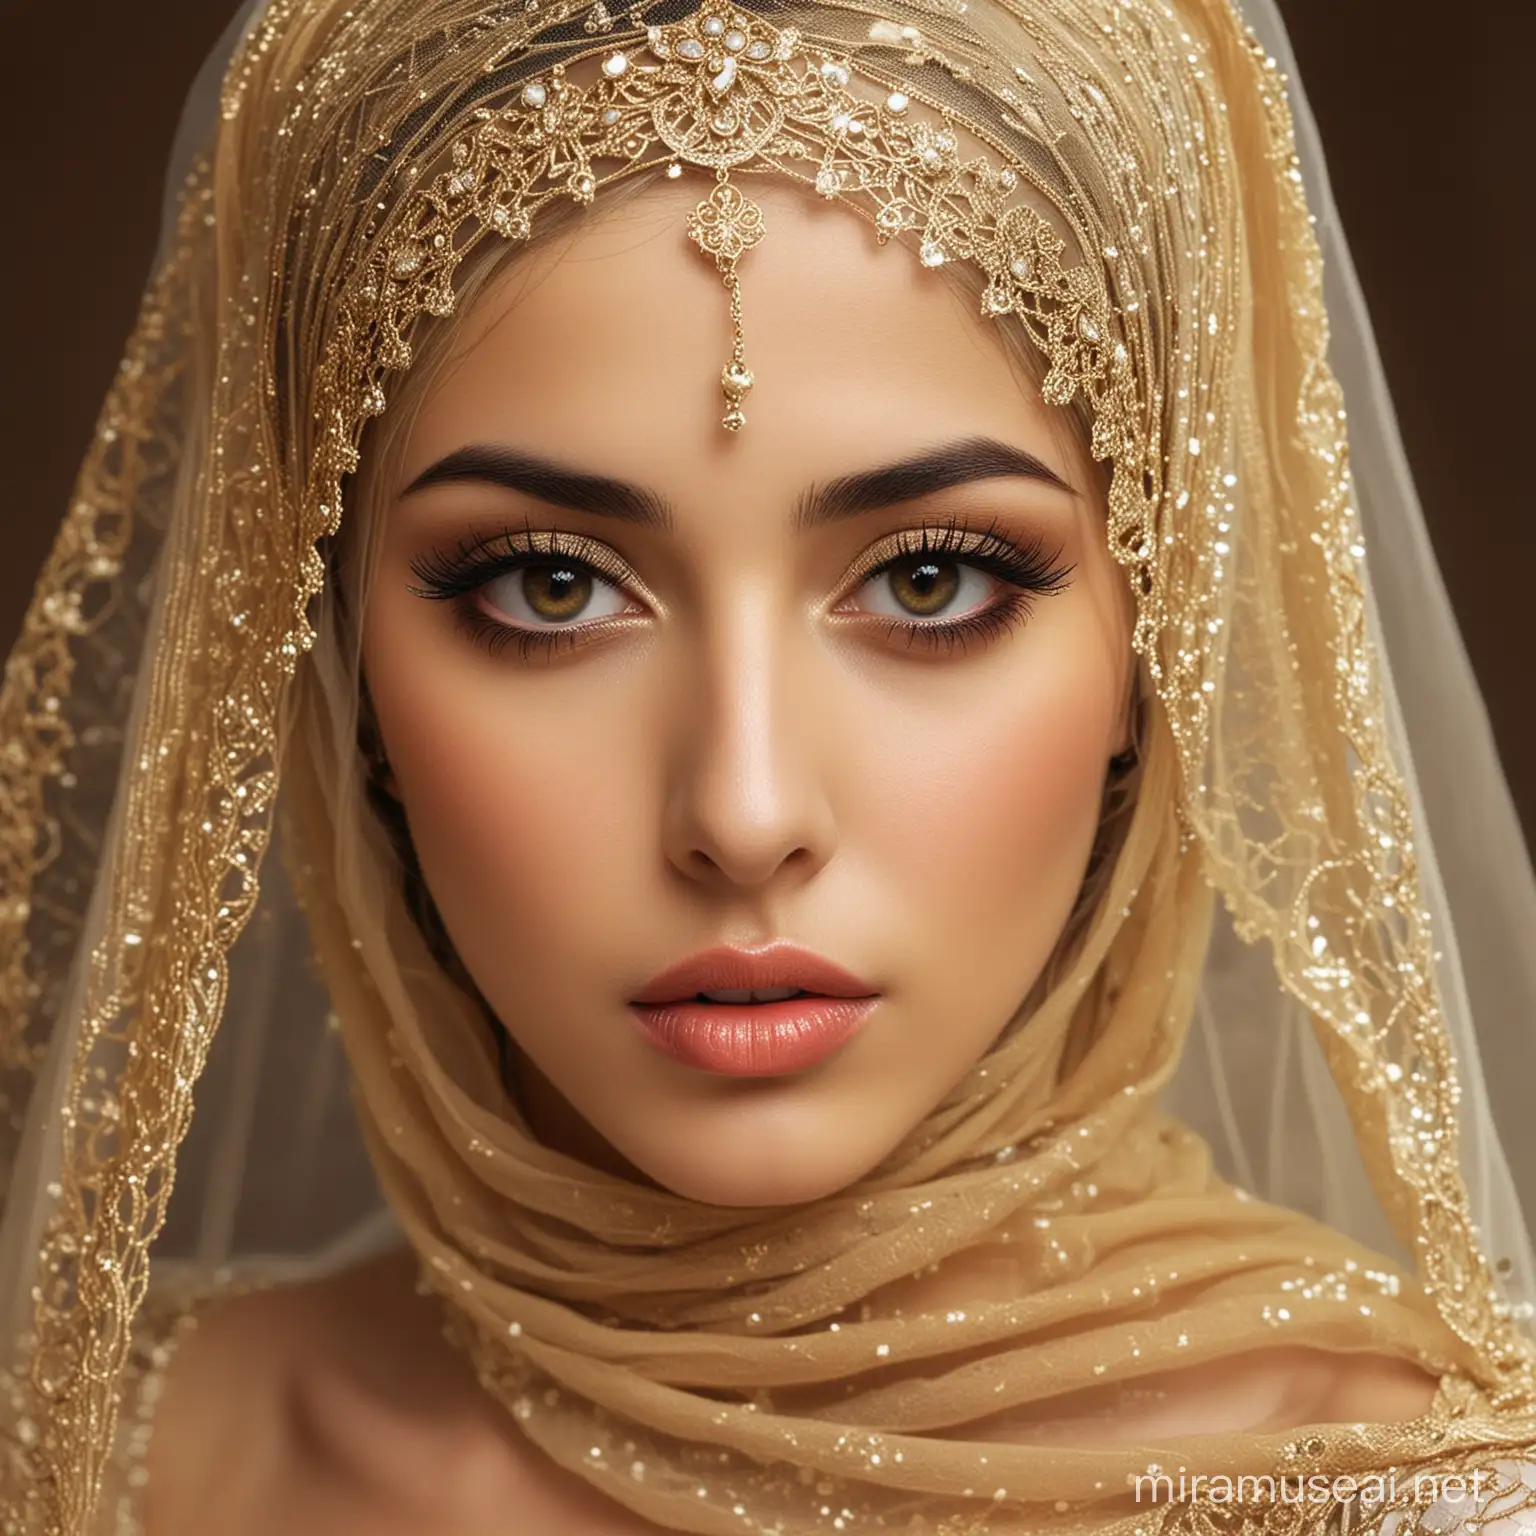 Glamorous Iranian Veiled Woman with Alluring Eyes and Golden Attire